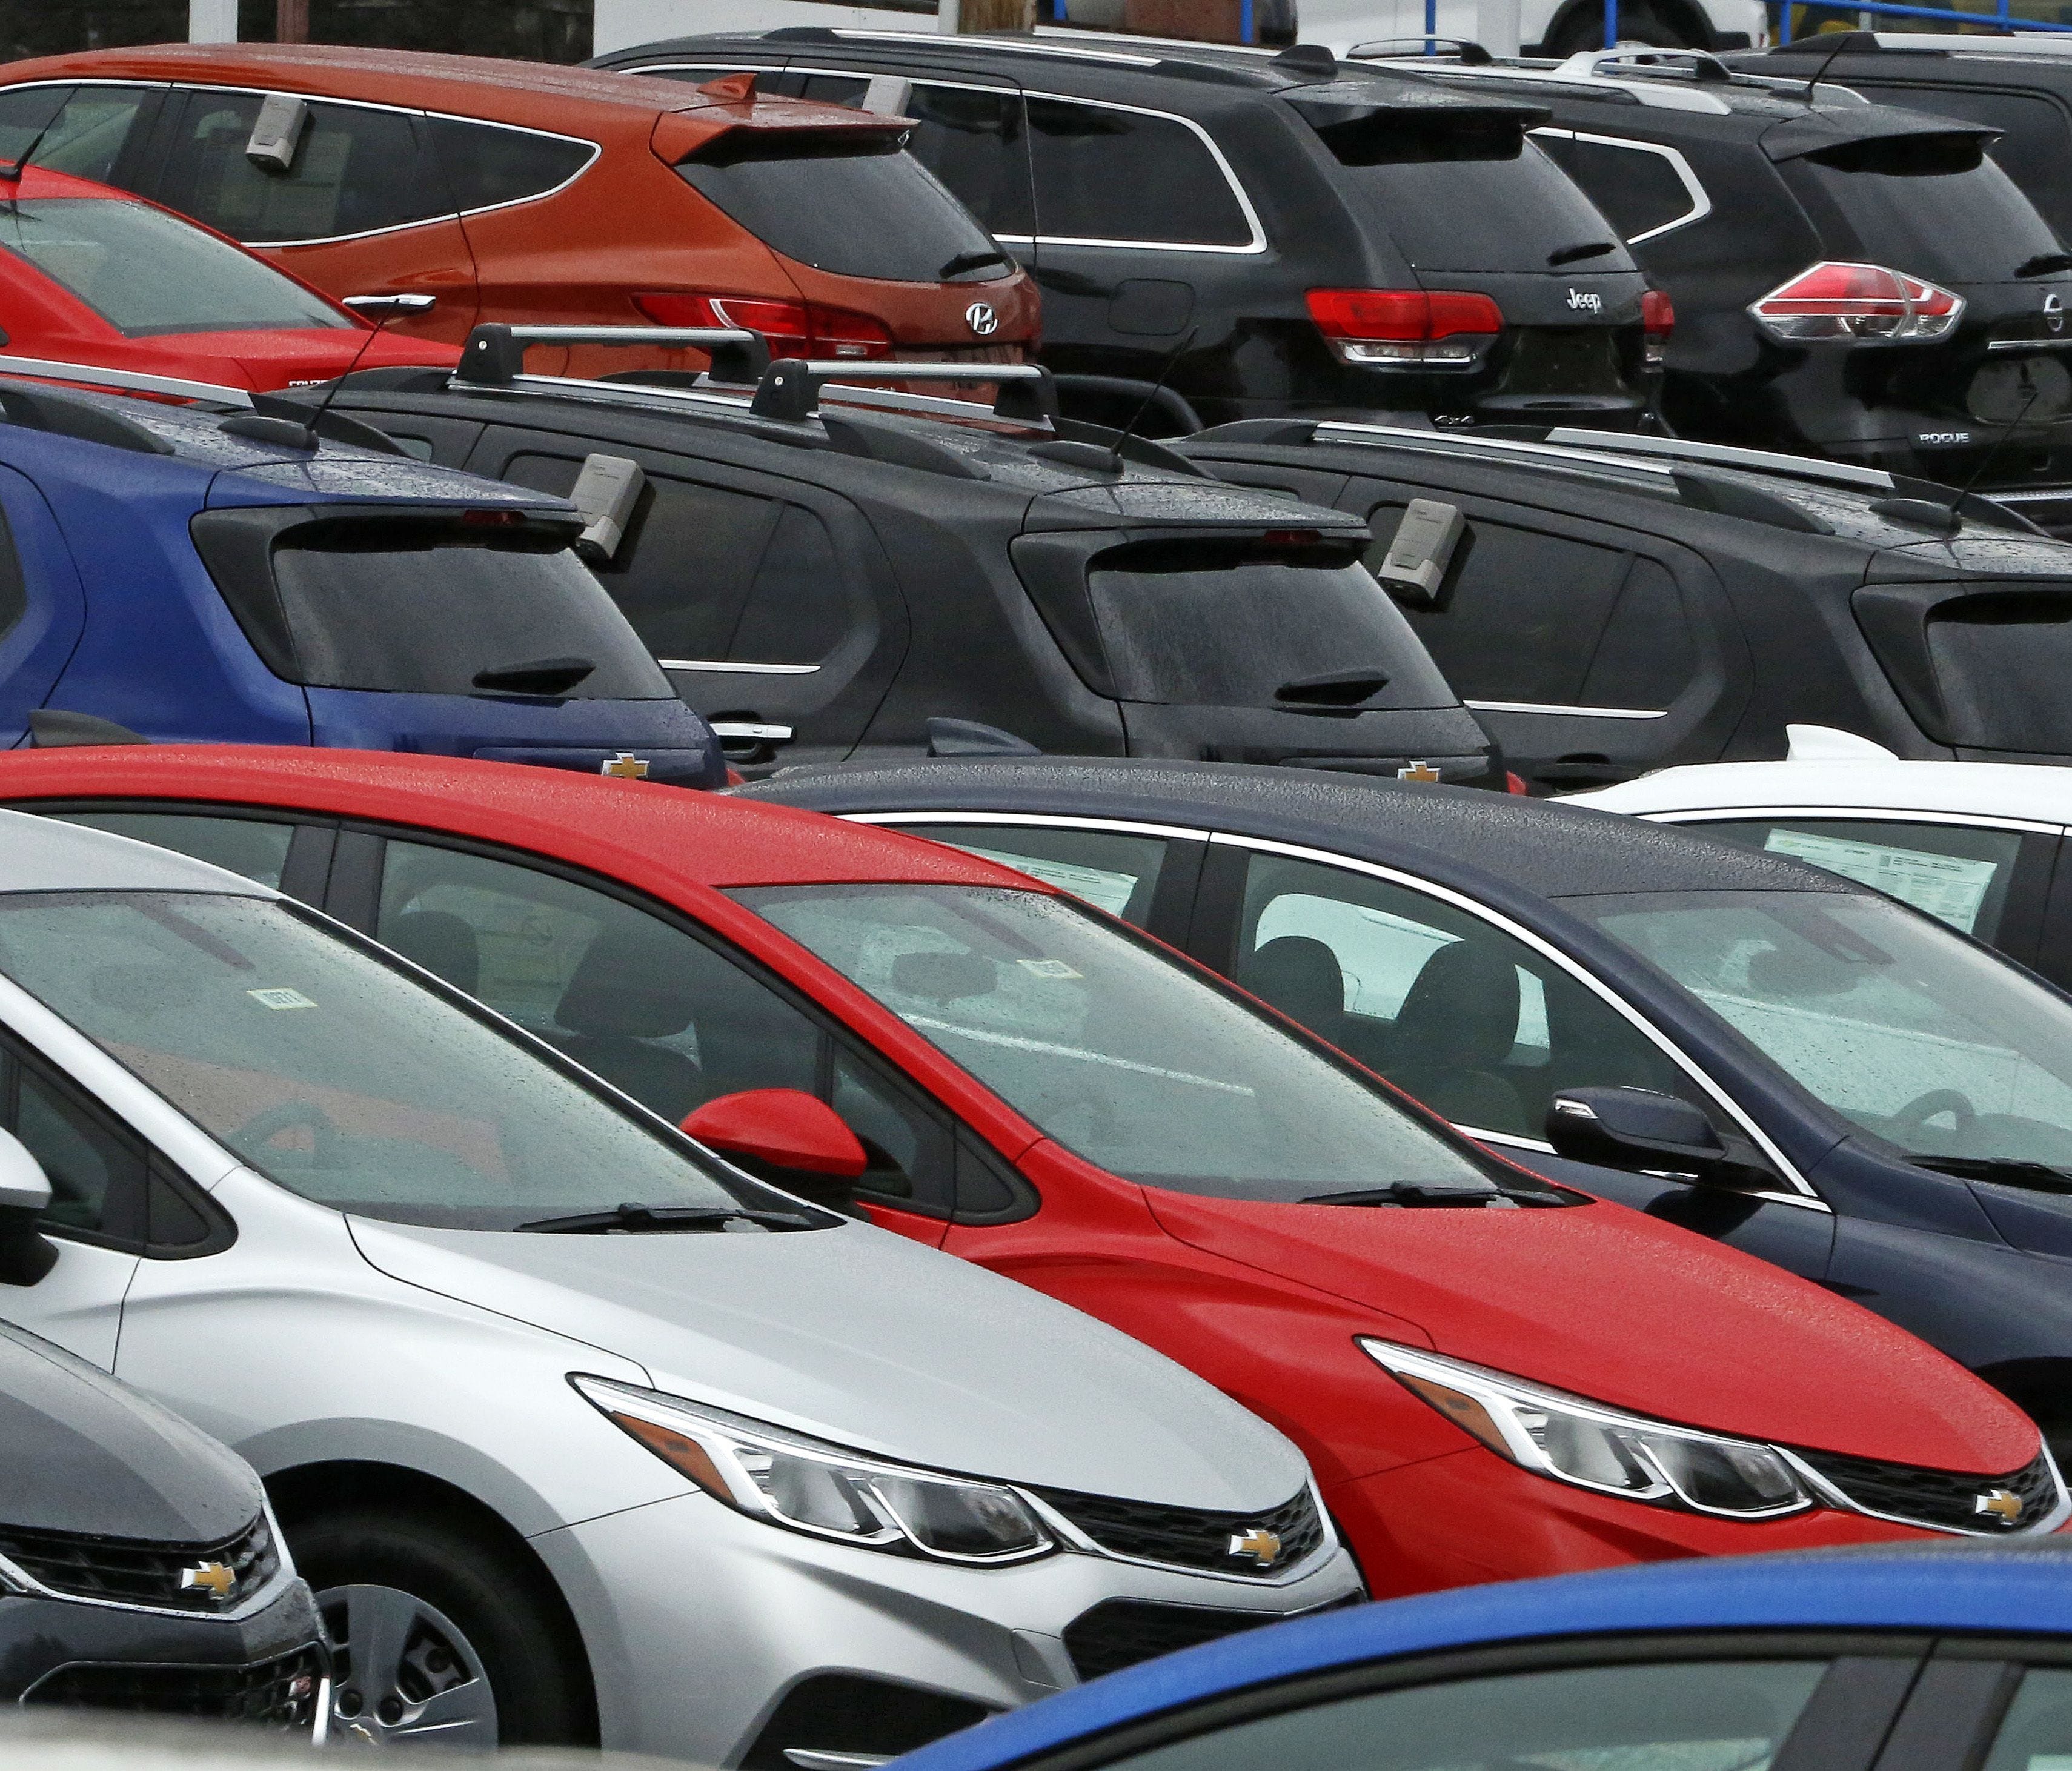 Chevrolet cars are positioned on a dealer lot in Pittsburgh.